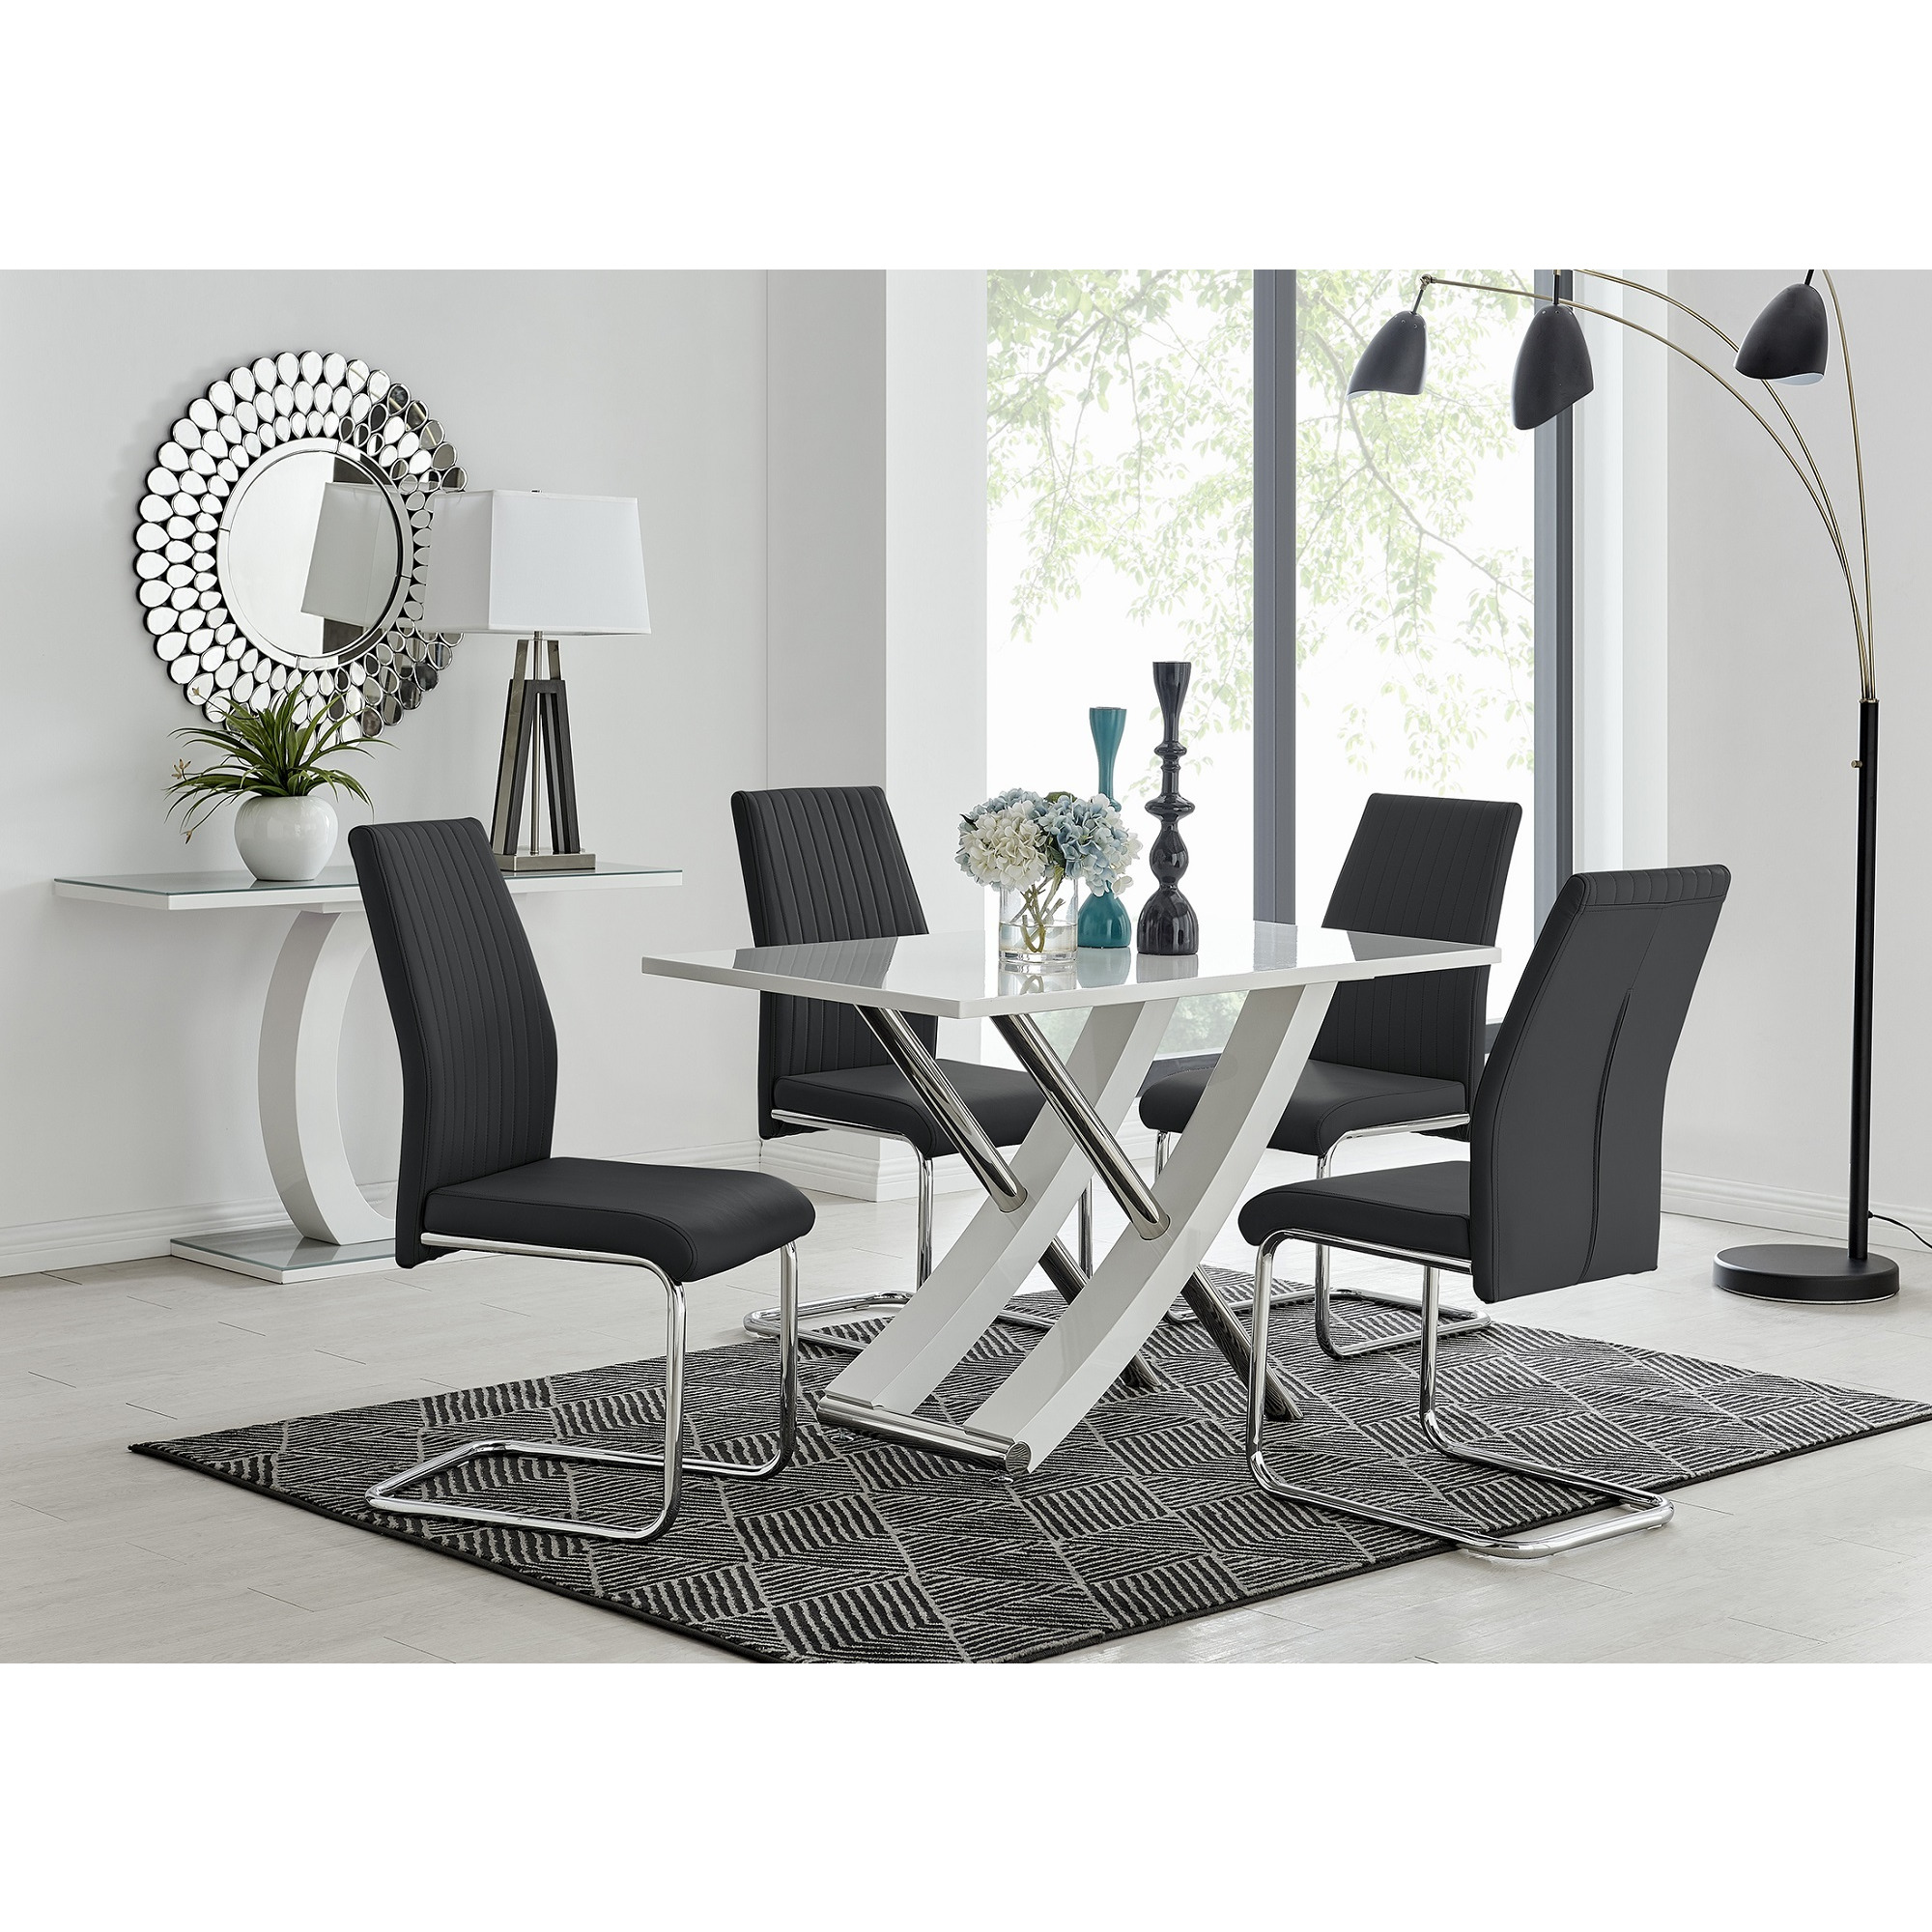 Mayfair 4 White High Gloss And Stainless Steel Dining Table And 4 Lorenzo Chairs Set